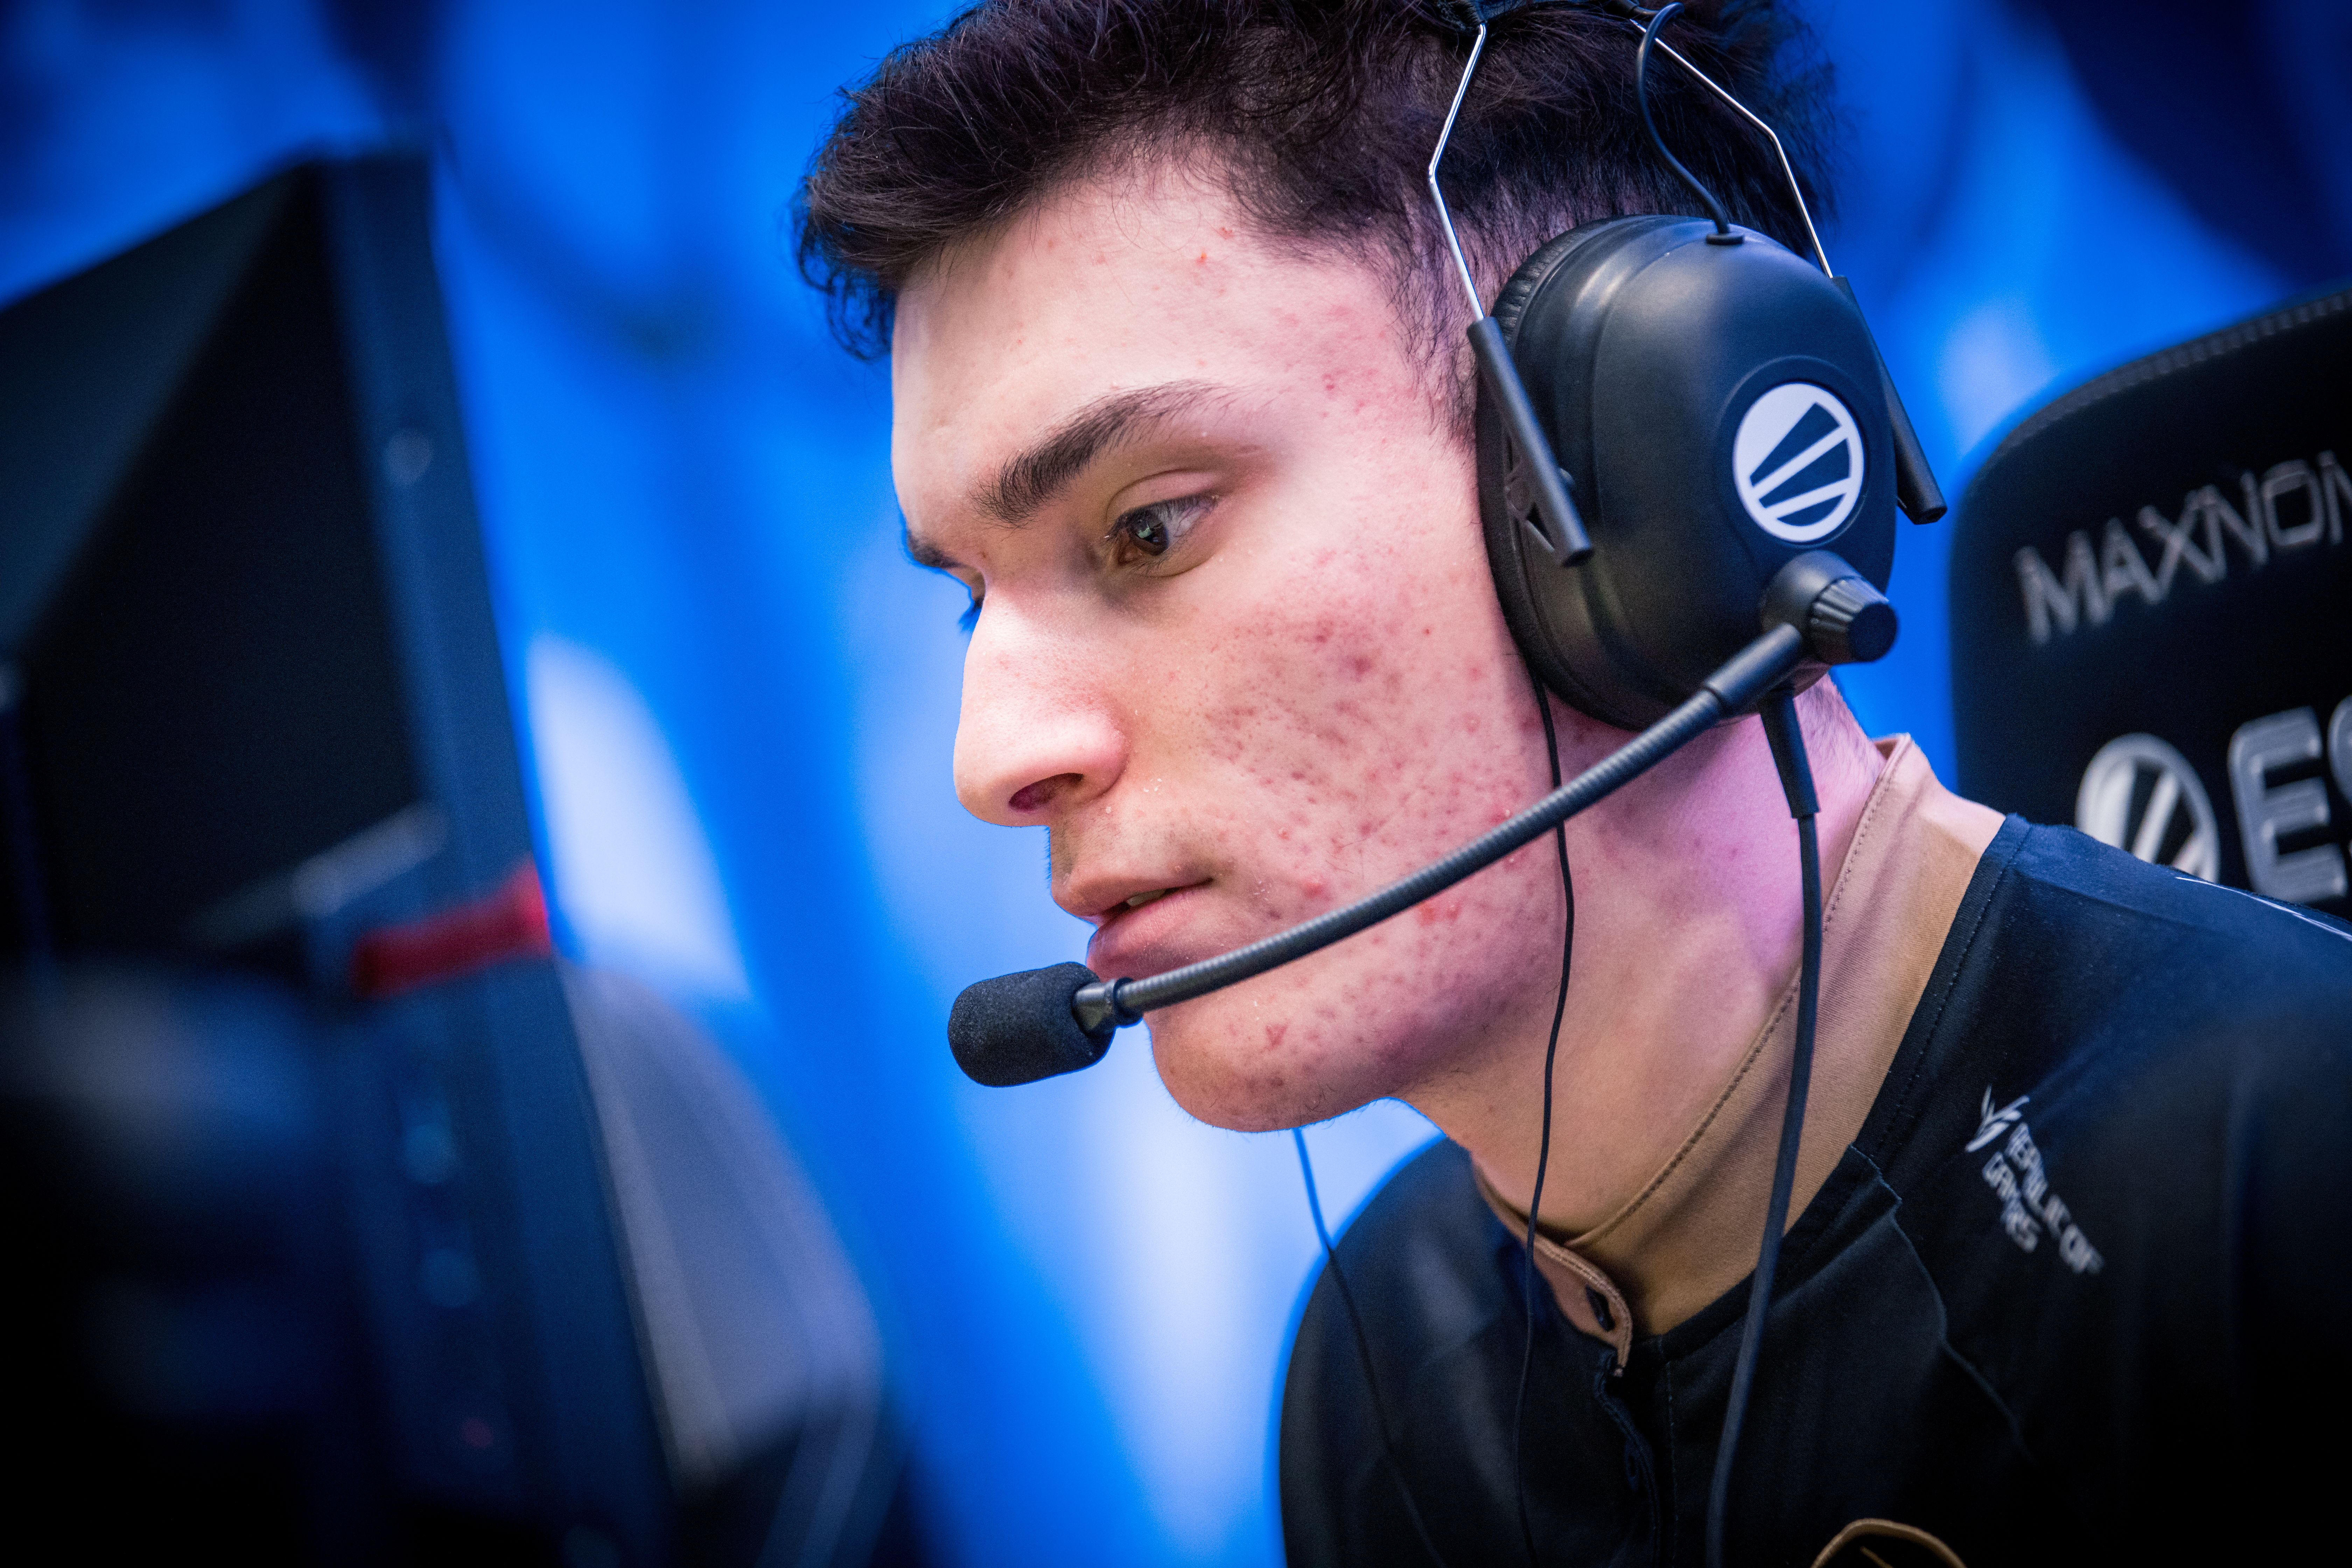 Plopski was expected to be a driving force for the Ninjas in 2020. Copyright: ESL | Helena Kristiansson